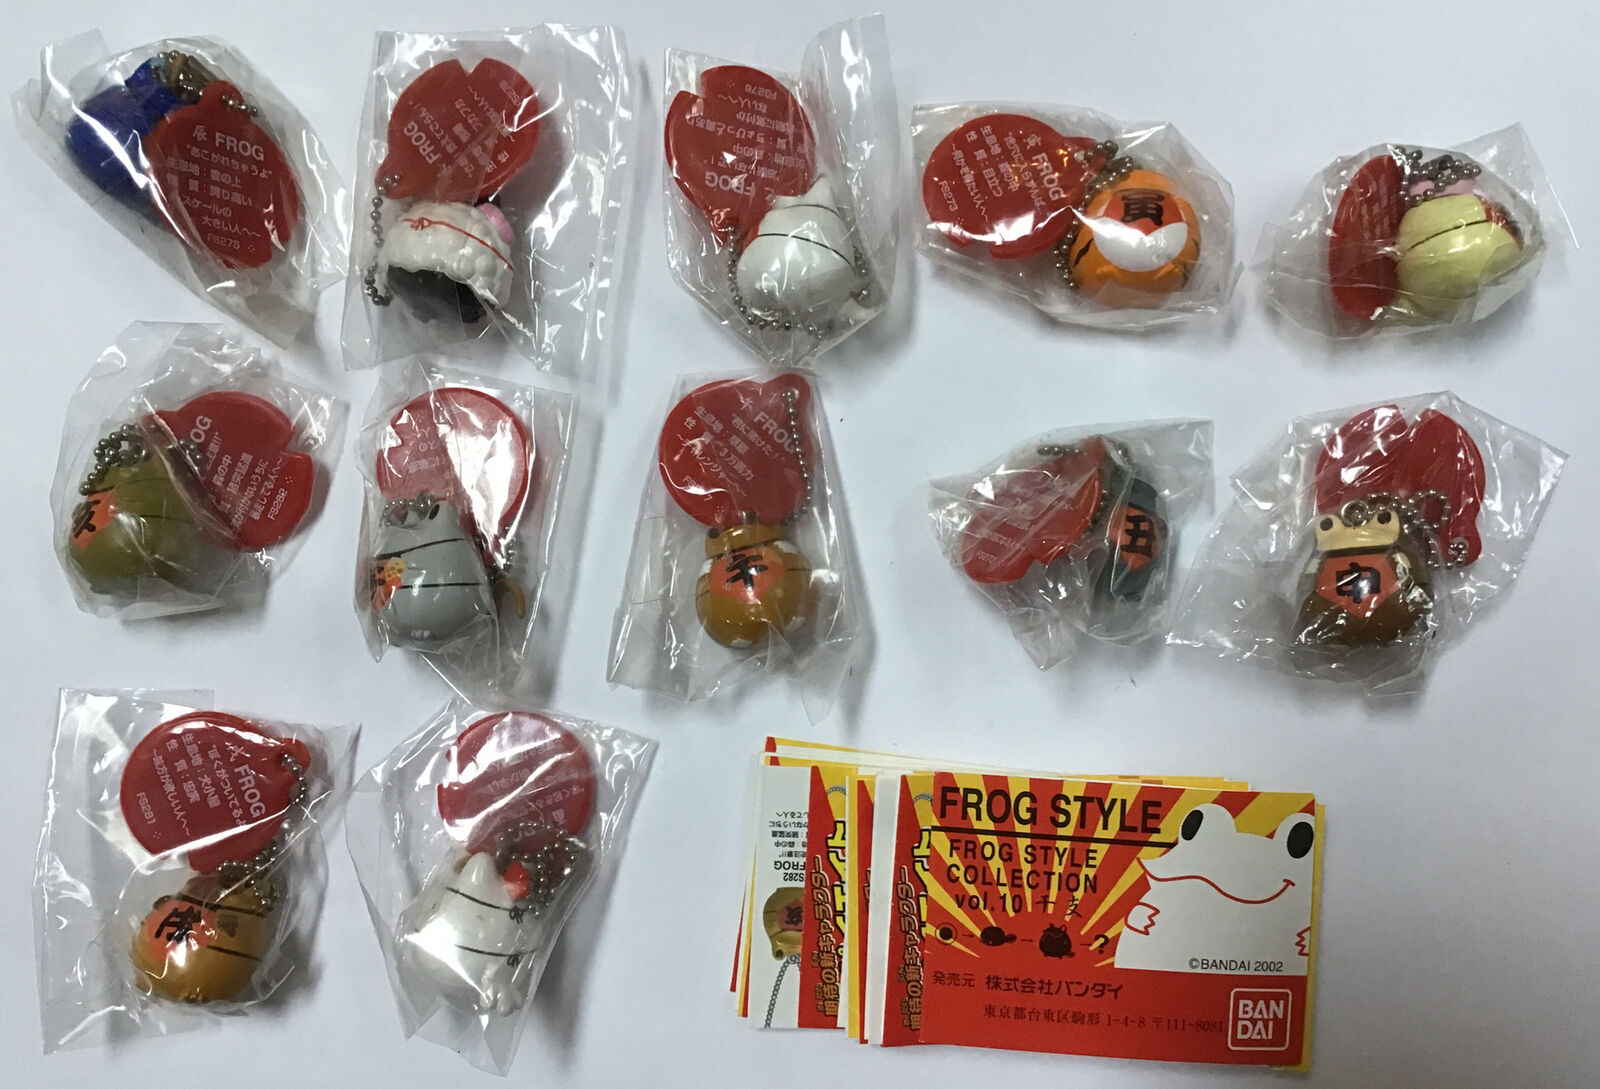 Complete Set of 12 - 2004 Frog Style Collection Vol 10 - New - Bandai